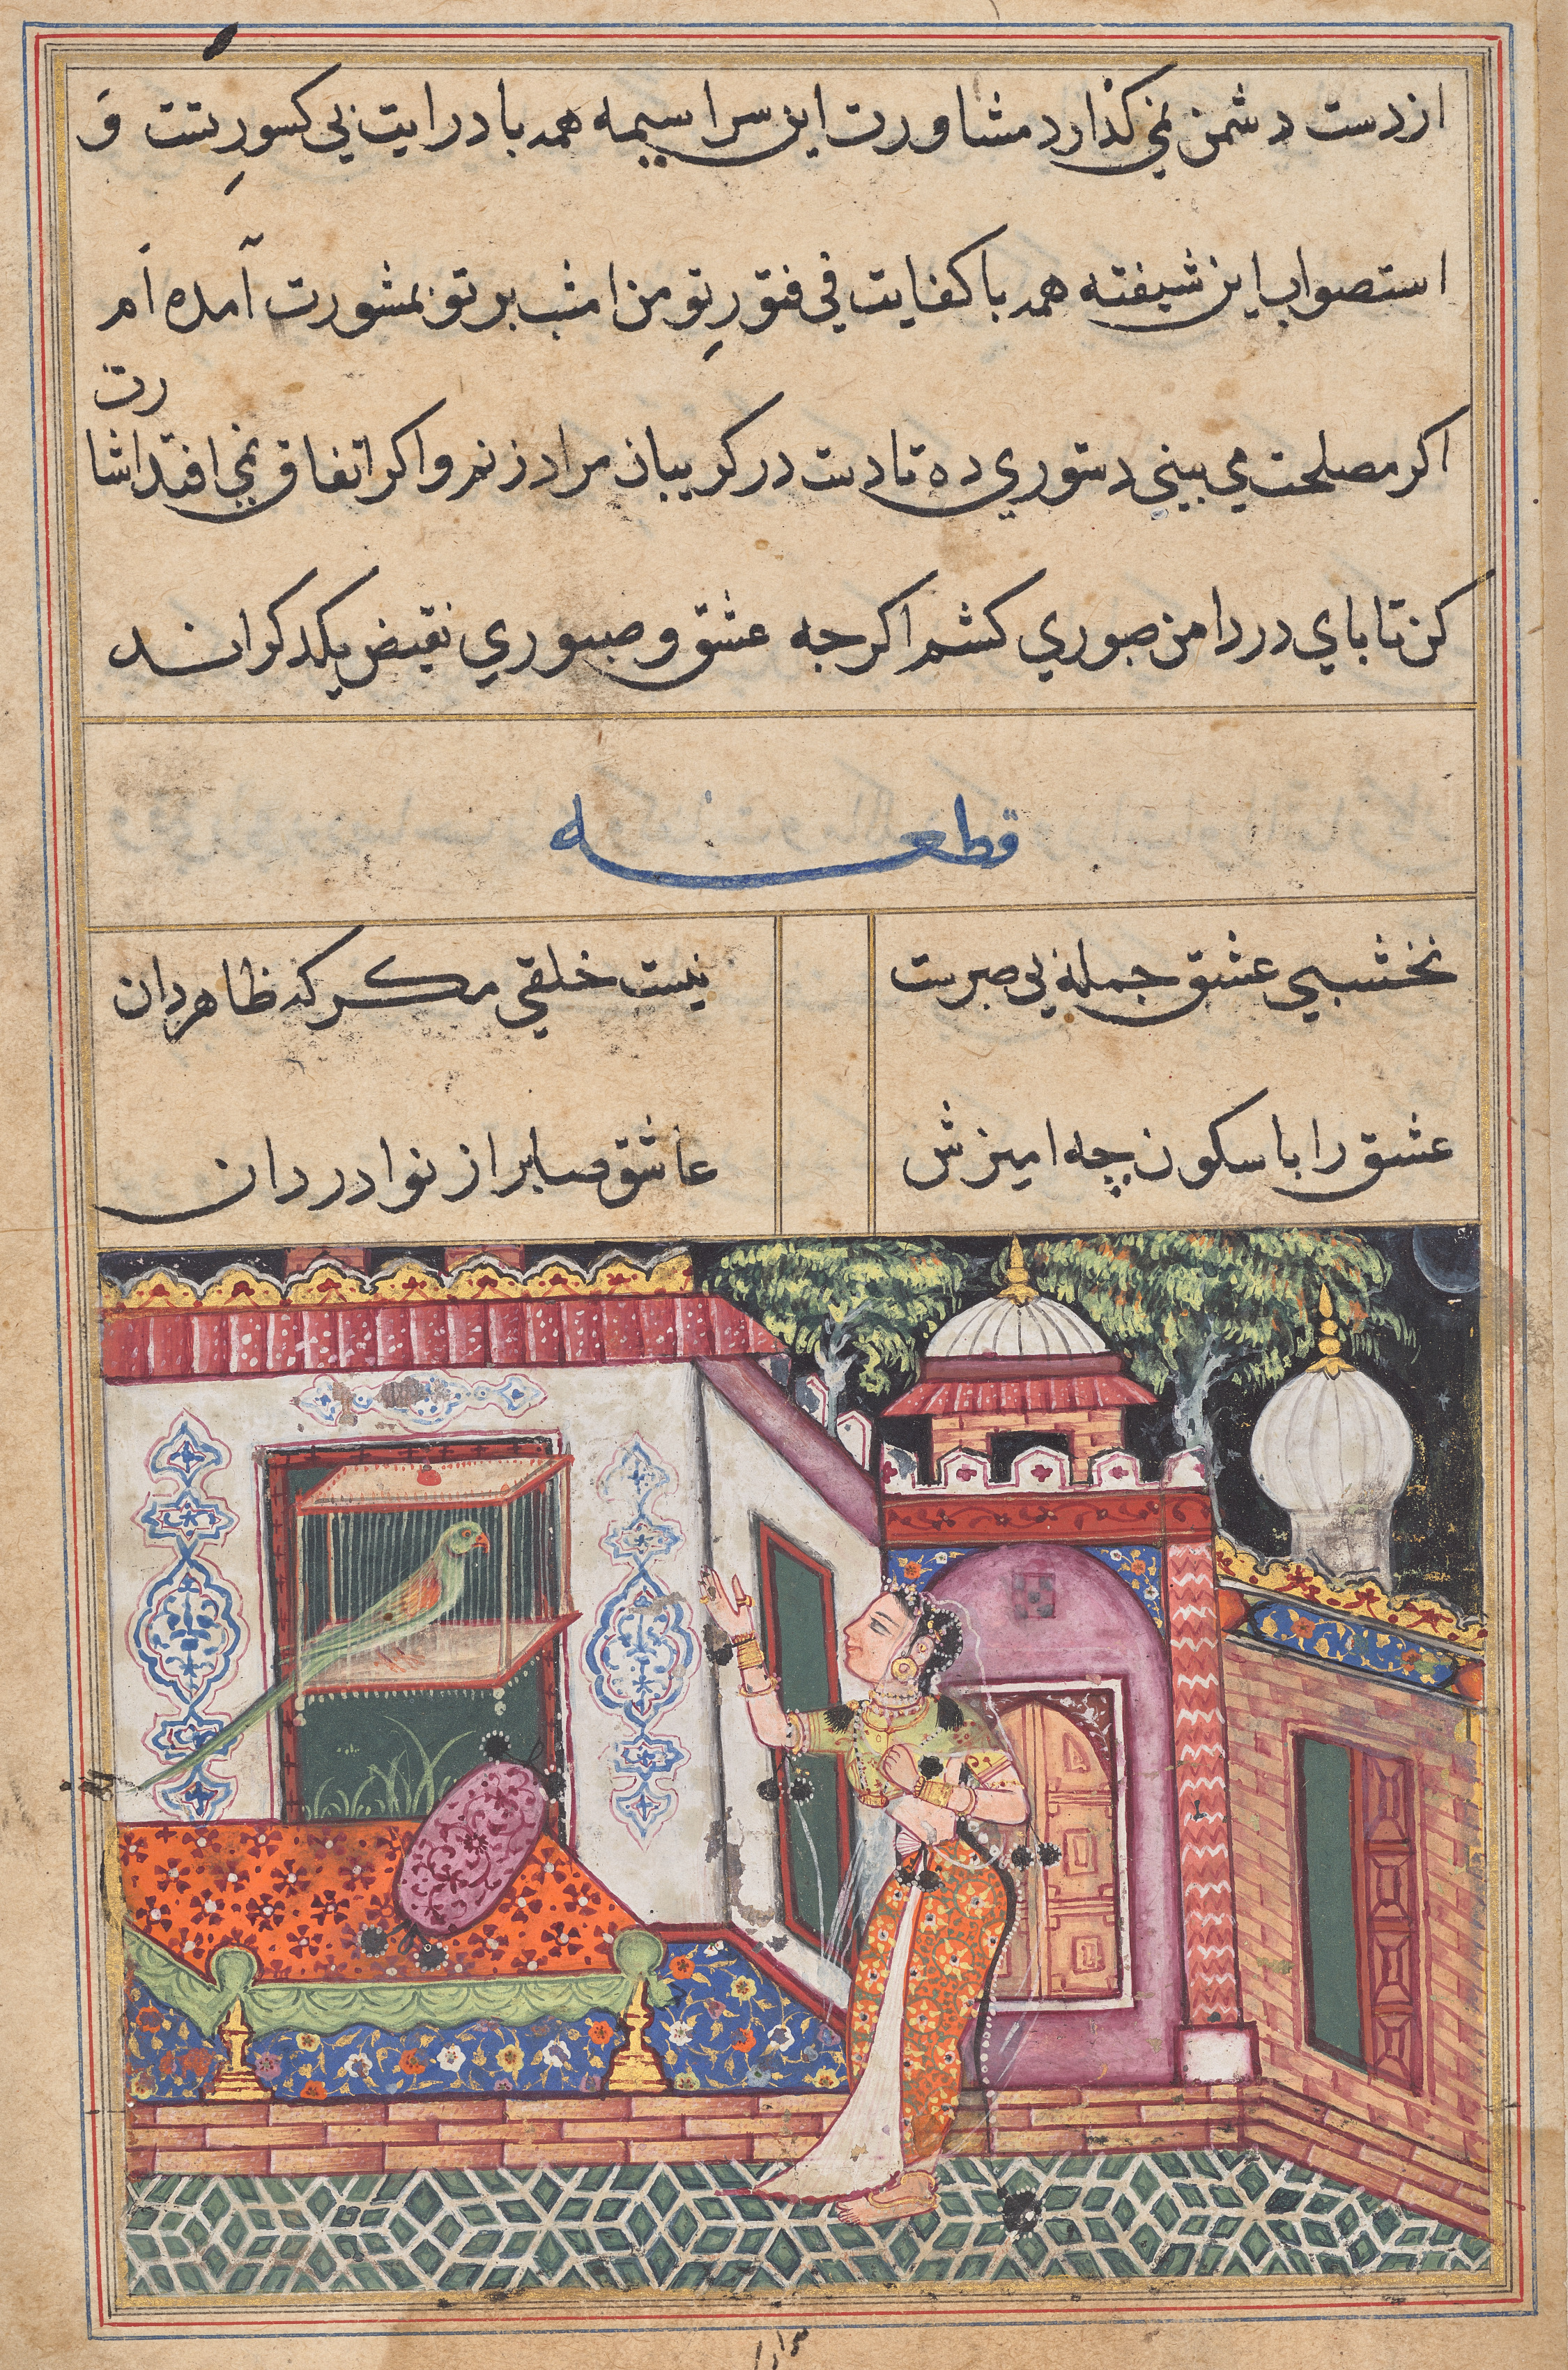 The Parrot Addresses Khujasta at the Beginning of the Eleventh Night, from a Tuti-nama (Tales of a Parrot)